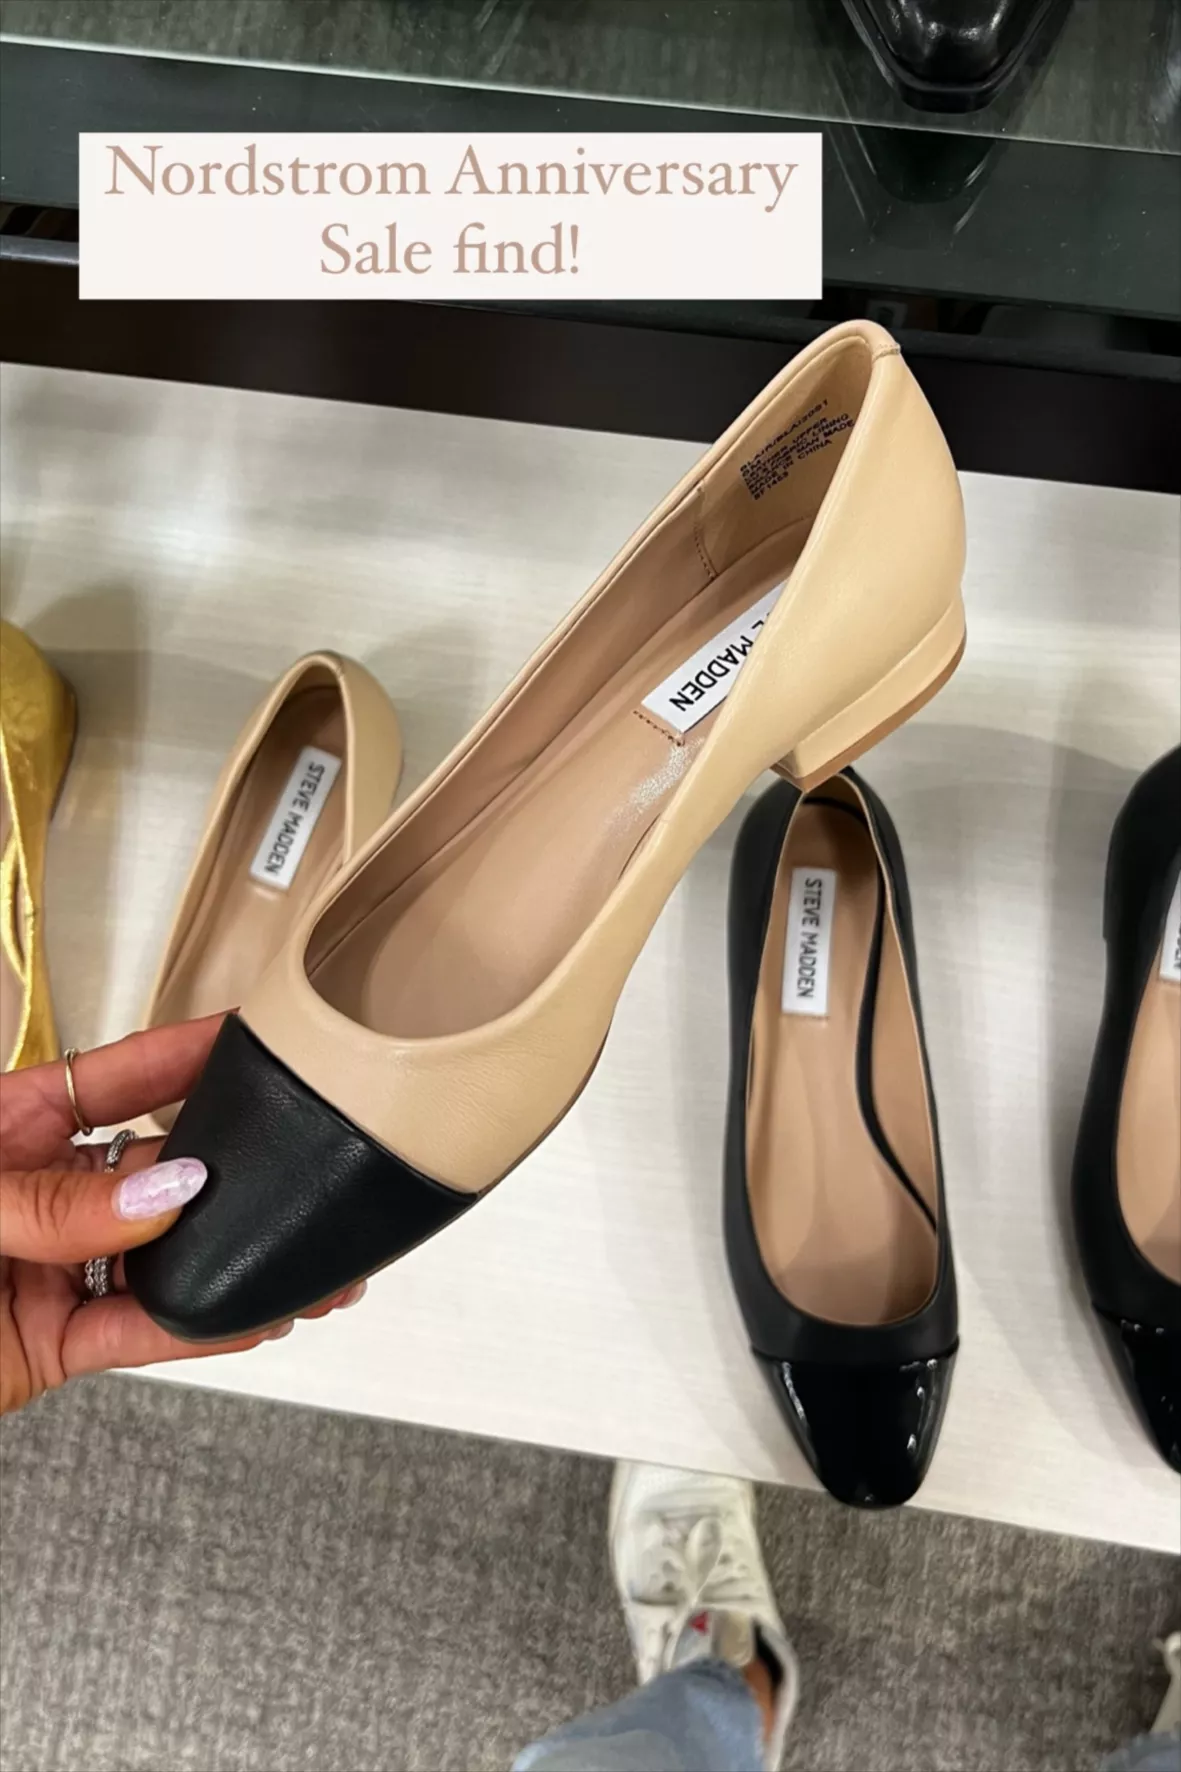 Ballet flats are celebs' new It shoes — but do they destroy your feet?